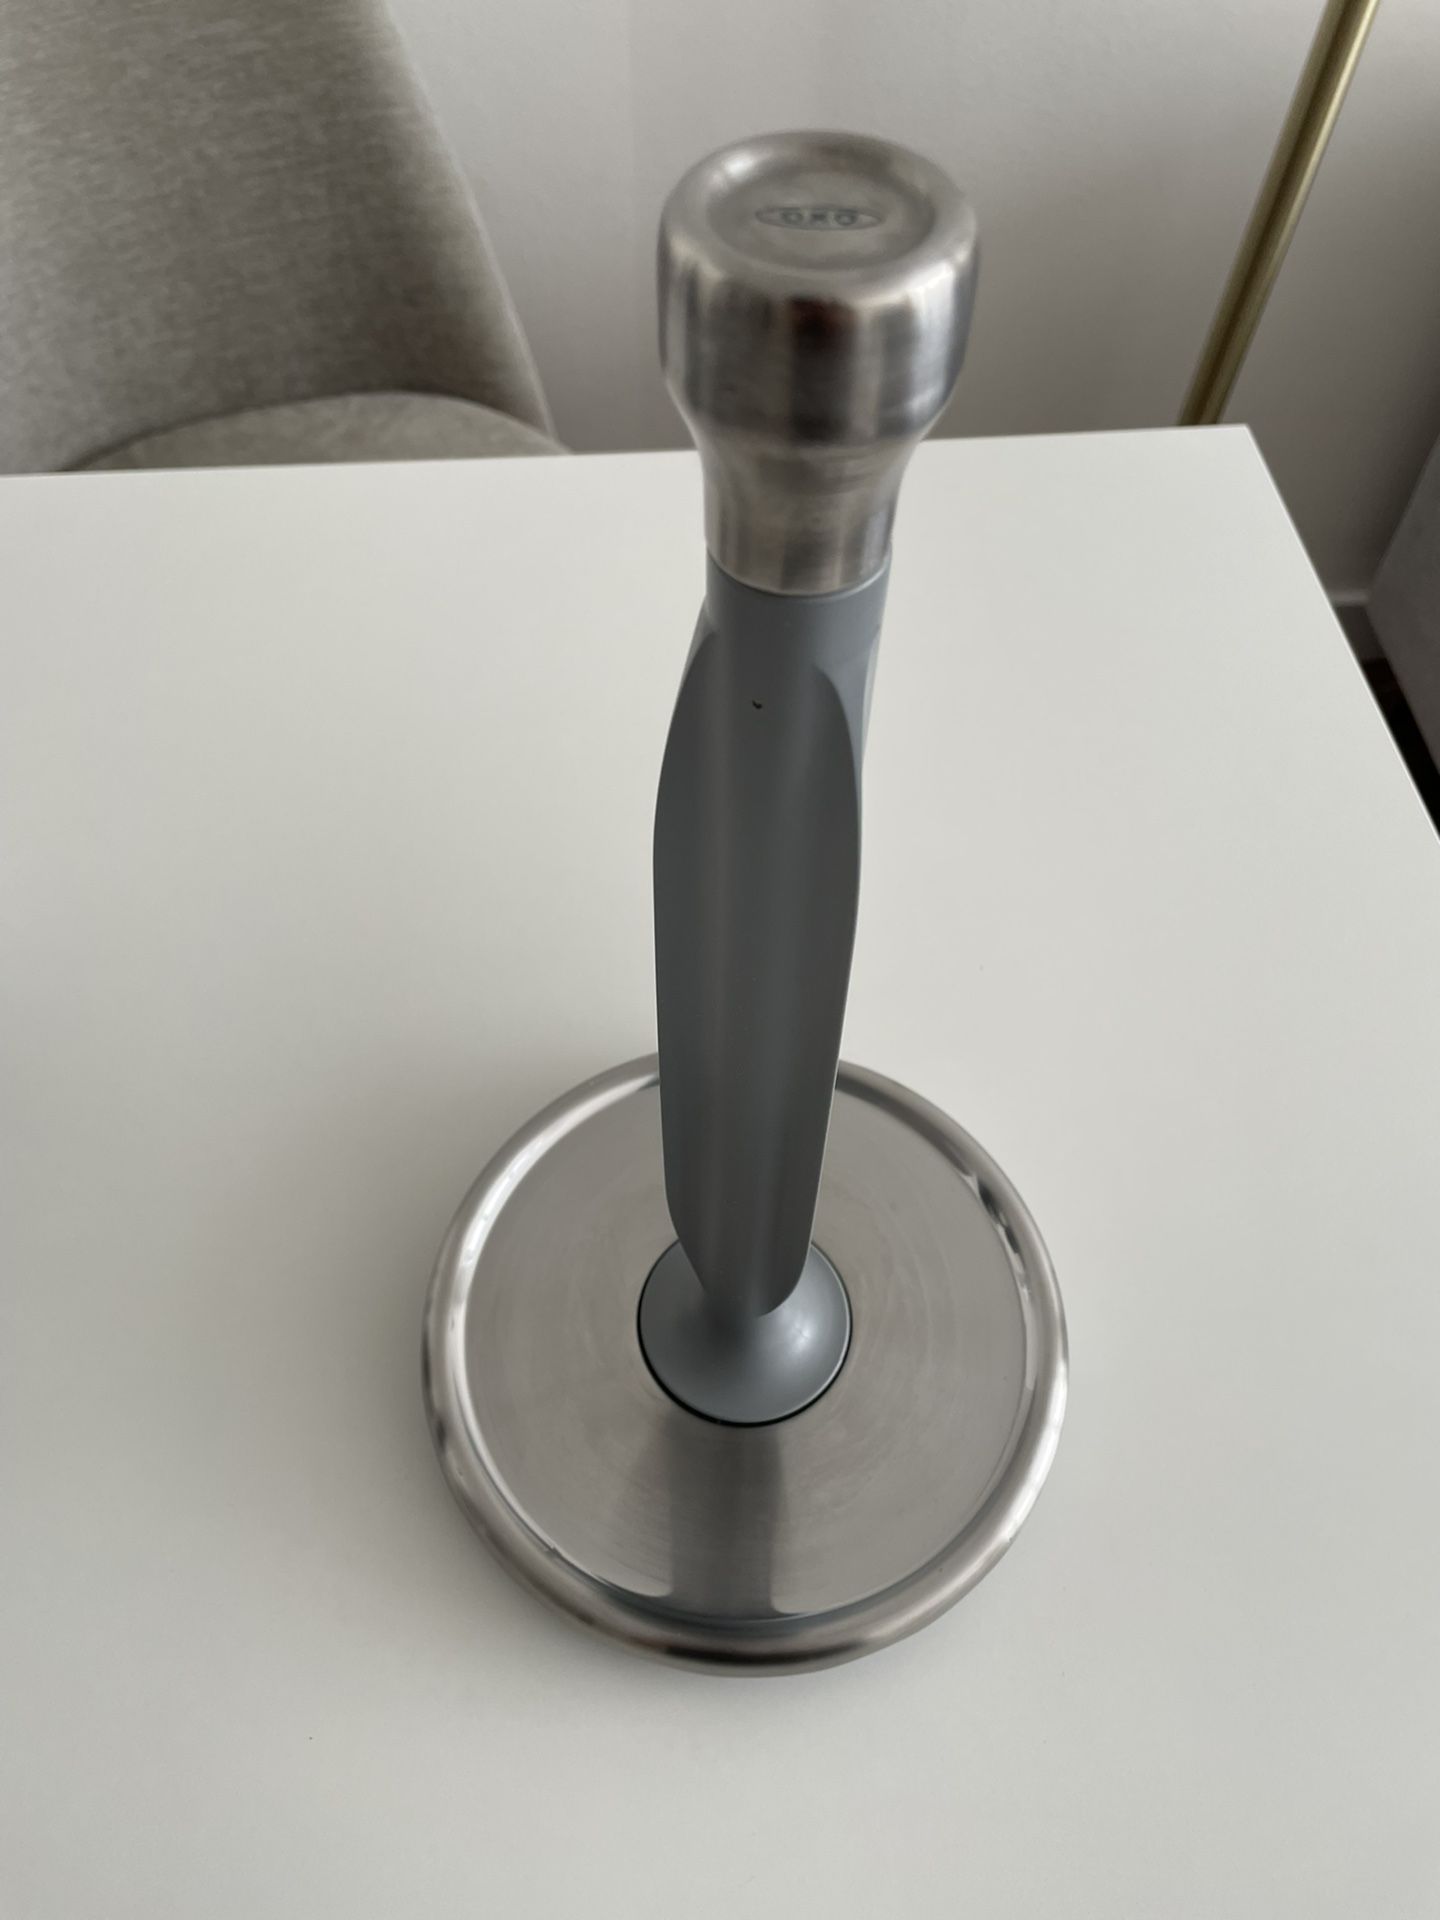 Oxo Paper Towel Holder for Sale in Farmington, CT - OfferUp